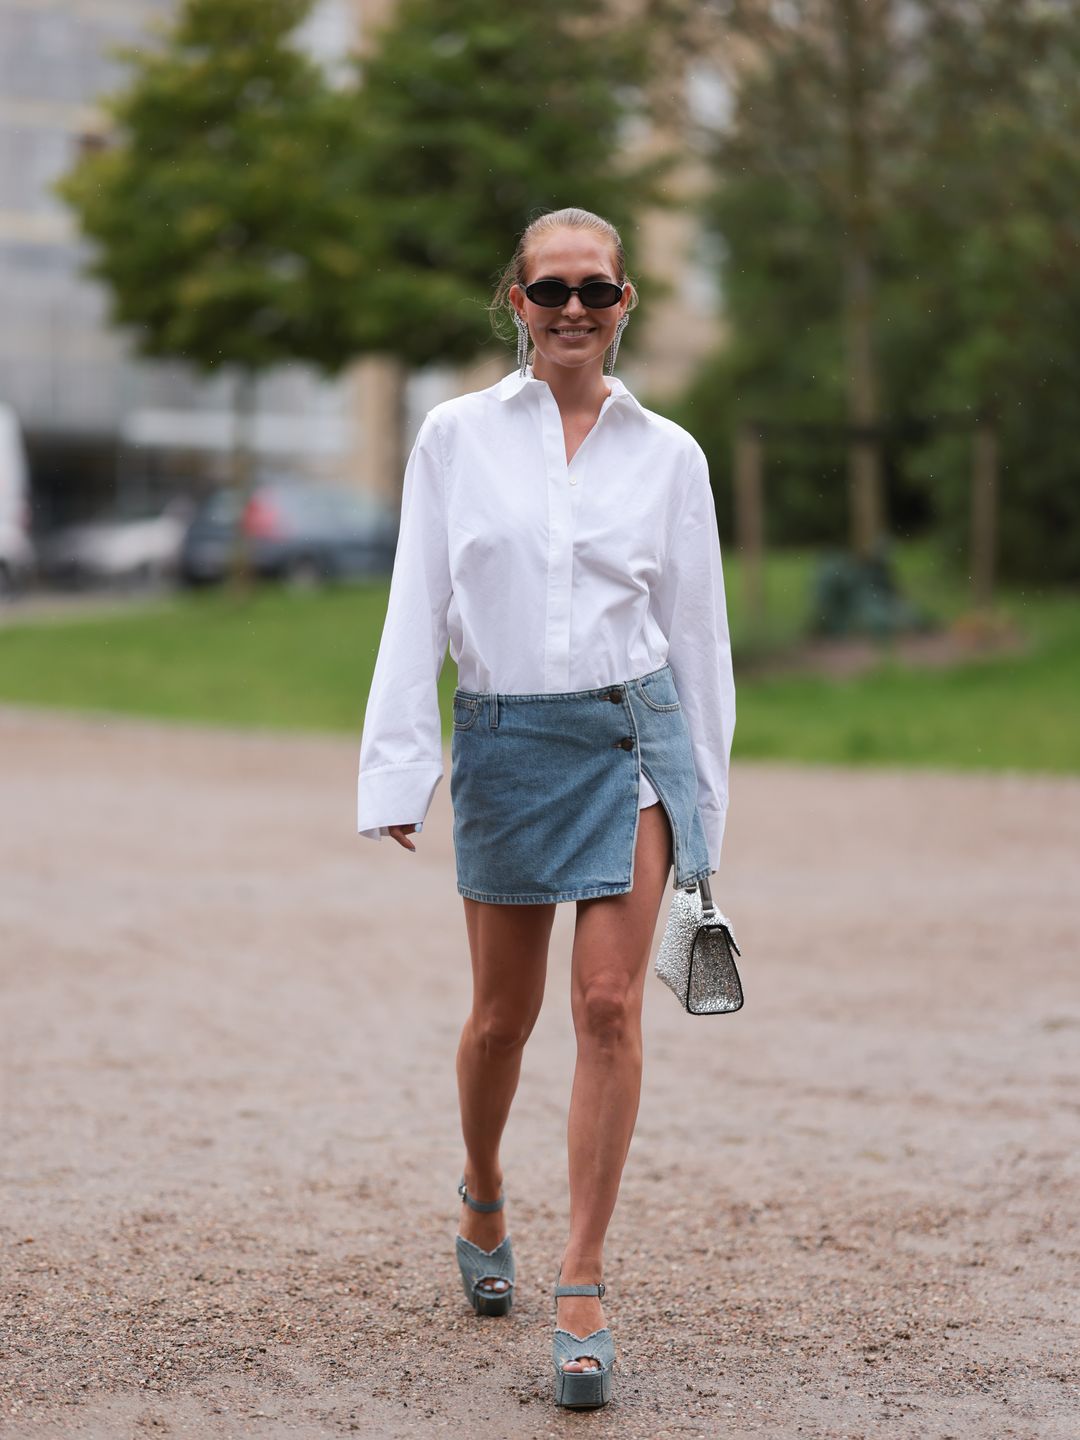 How to wear a denim shirt: Style your shirt according to an expert